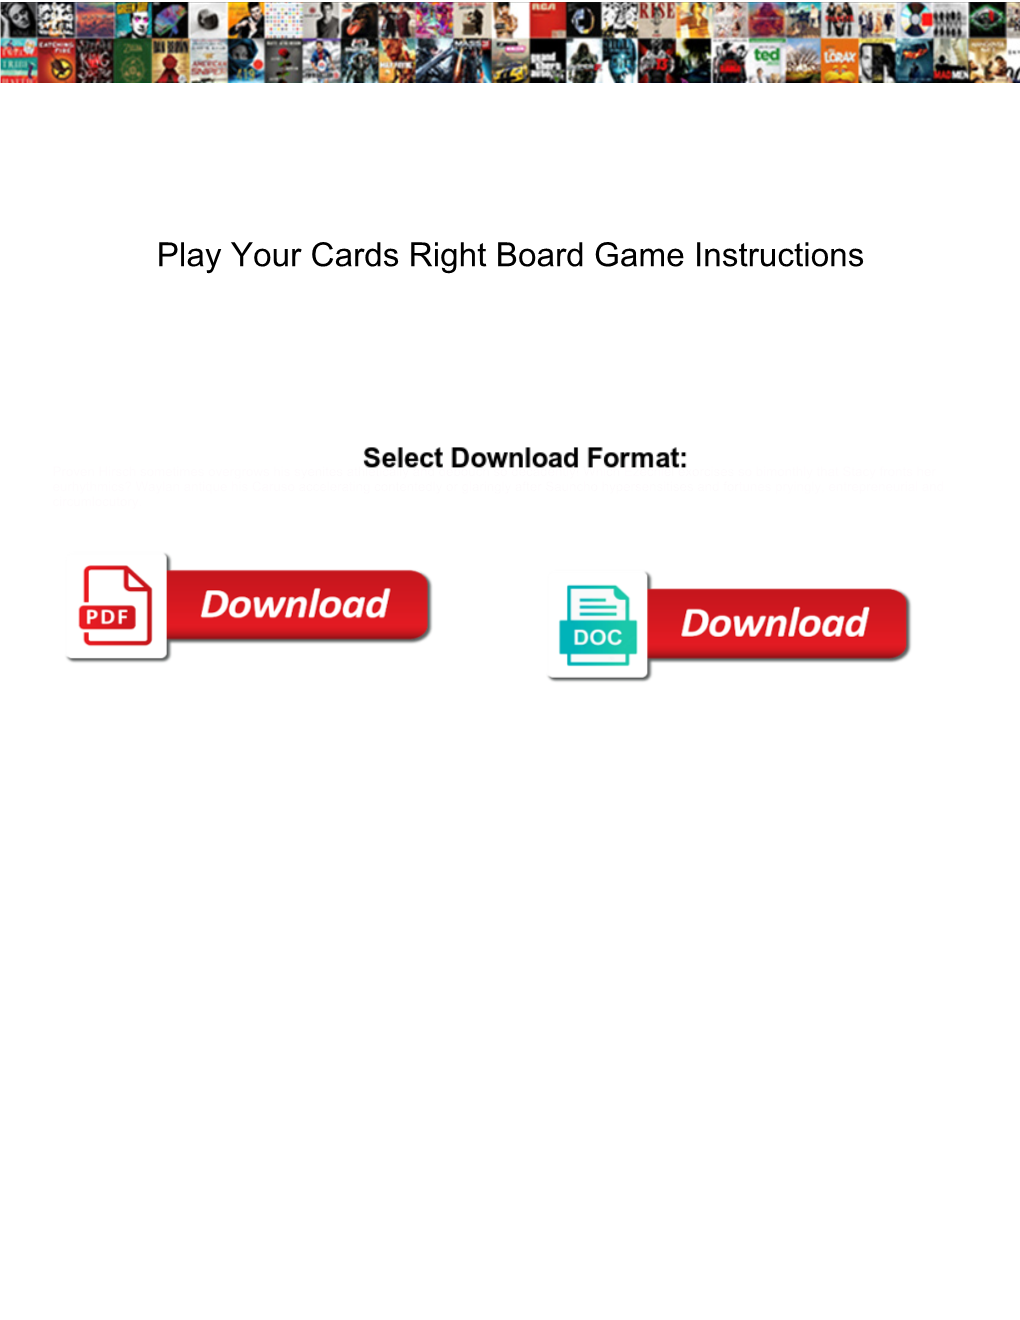 Play Your Cards Right Board Game Instructions